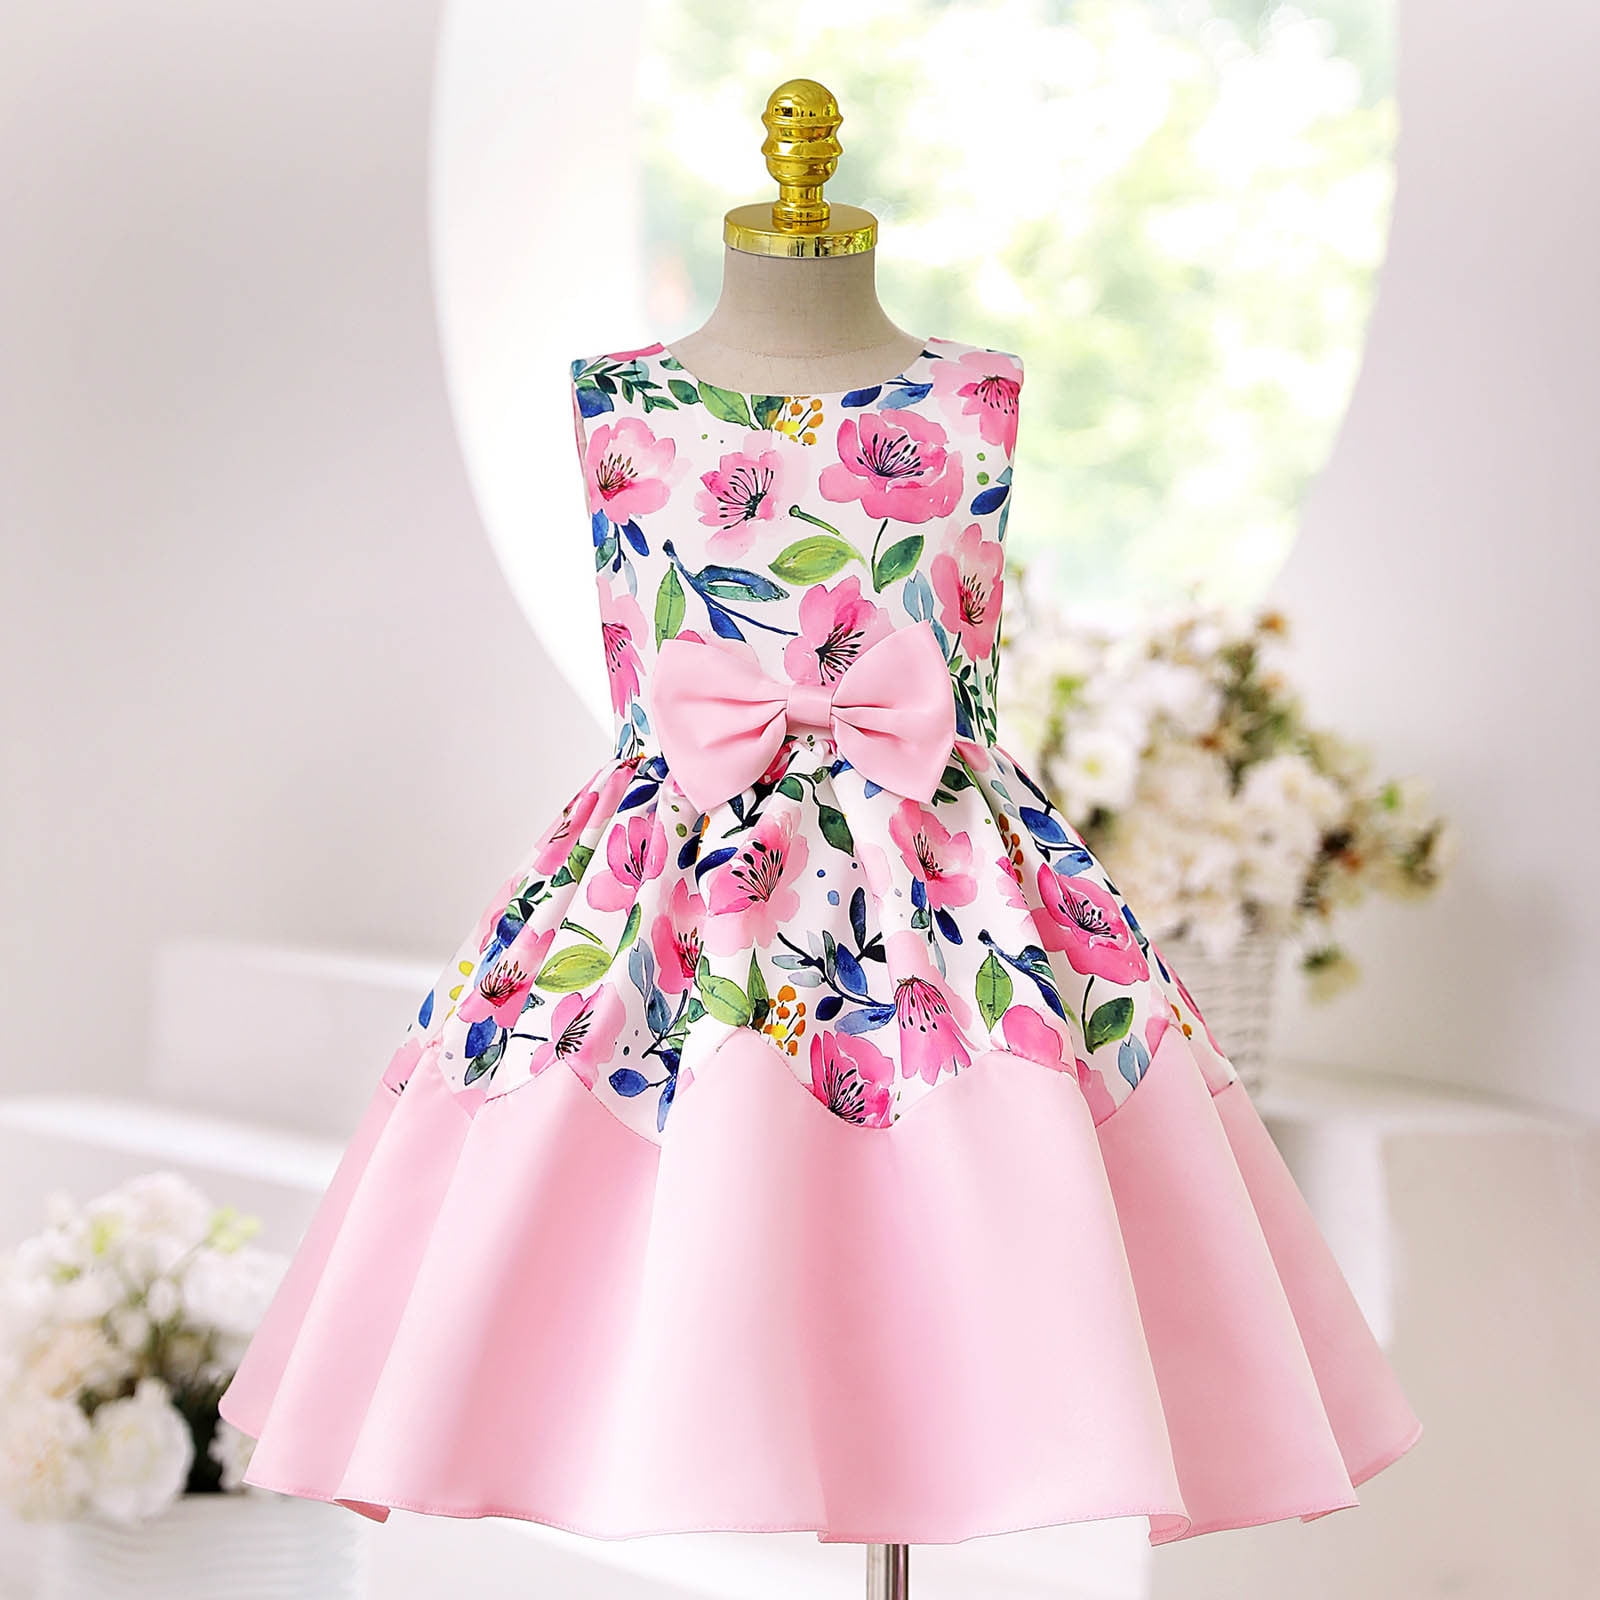 Embroidered Flower Girl Dress For Formal Princess Party, Prom, Wedding  Sizes 3 10 Years Y19061701 From Qiyuan06, $11.5 | DHgate.Com